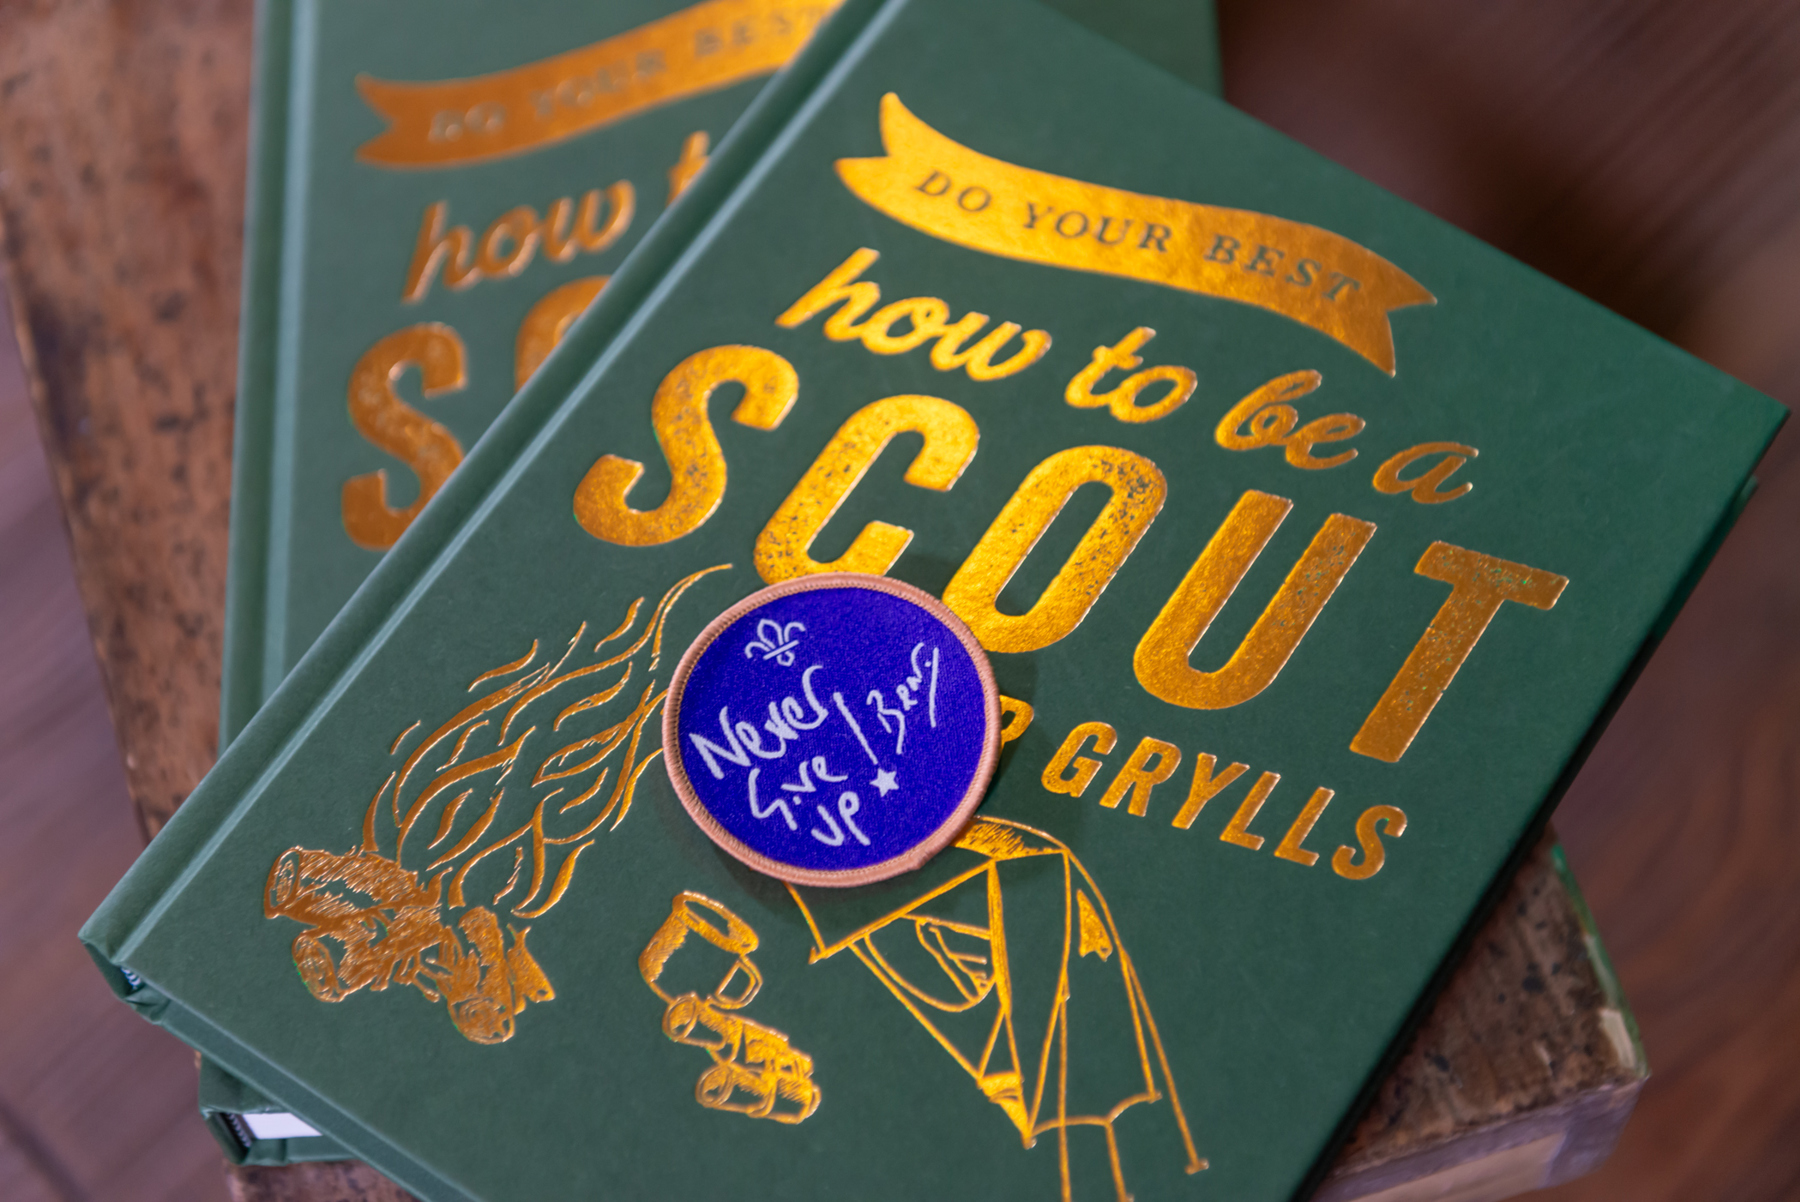 The image shows two copies of Chief Scout Bear Grylls' new book, Do Your Best: How to be a Scout, with a purple 'Never Give Up' badge on top of the cover. The books are laid on a wooden surface with one book on top of the other.